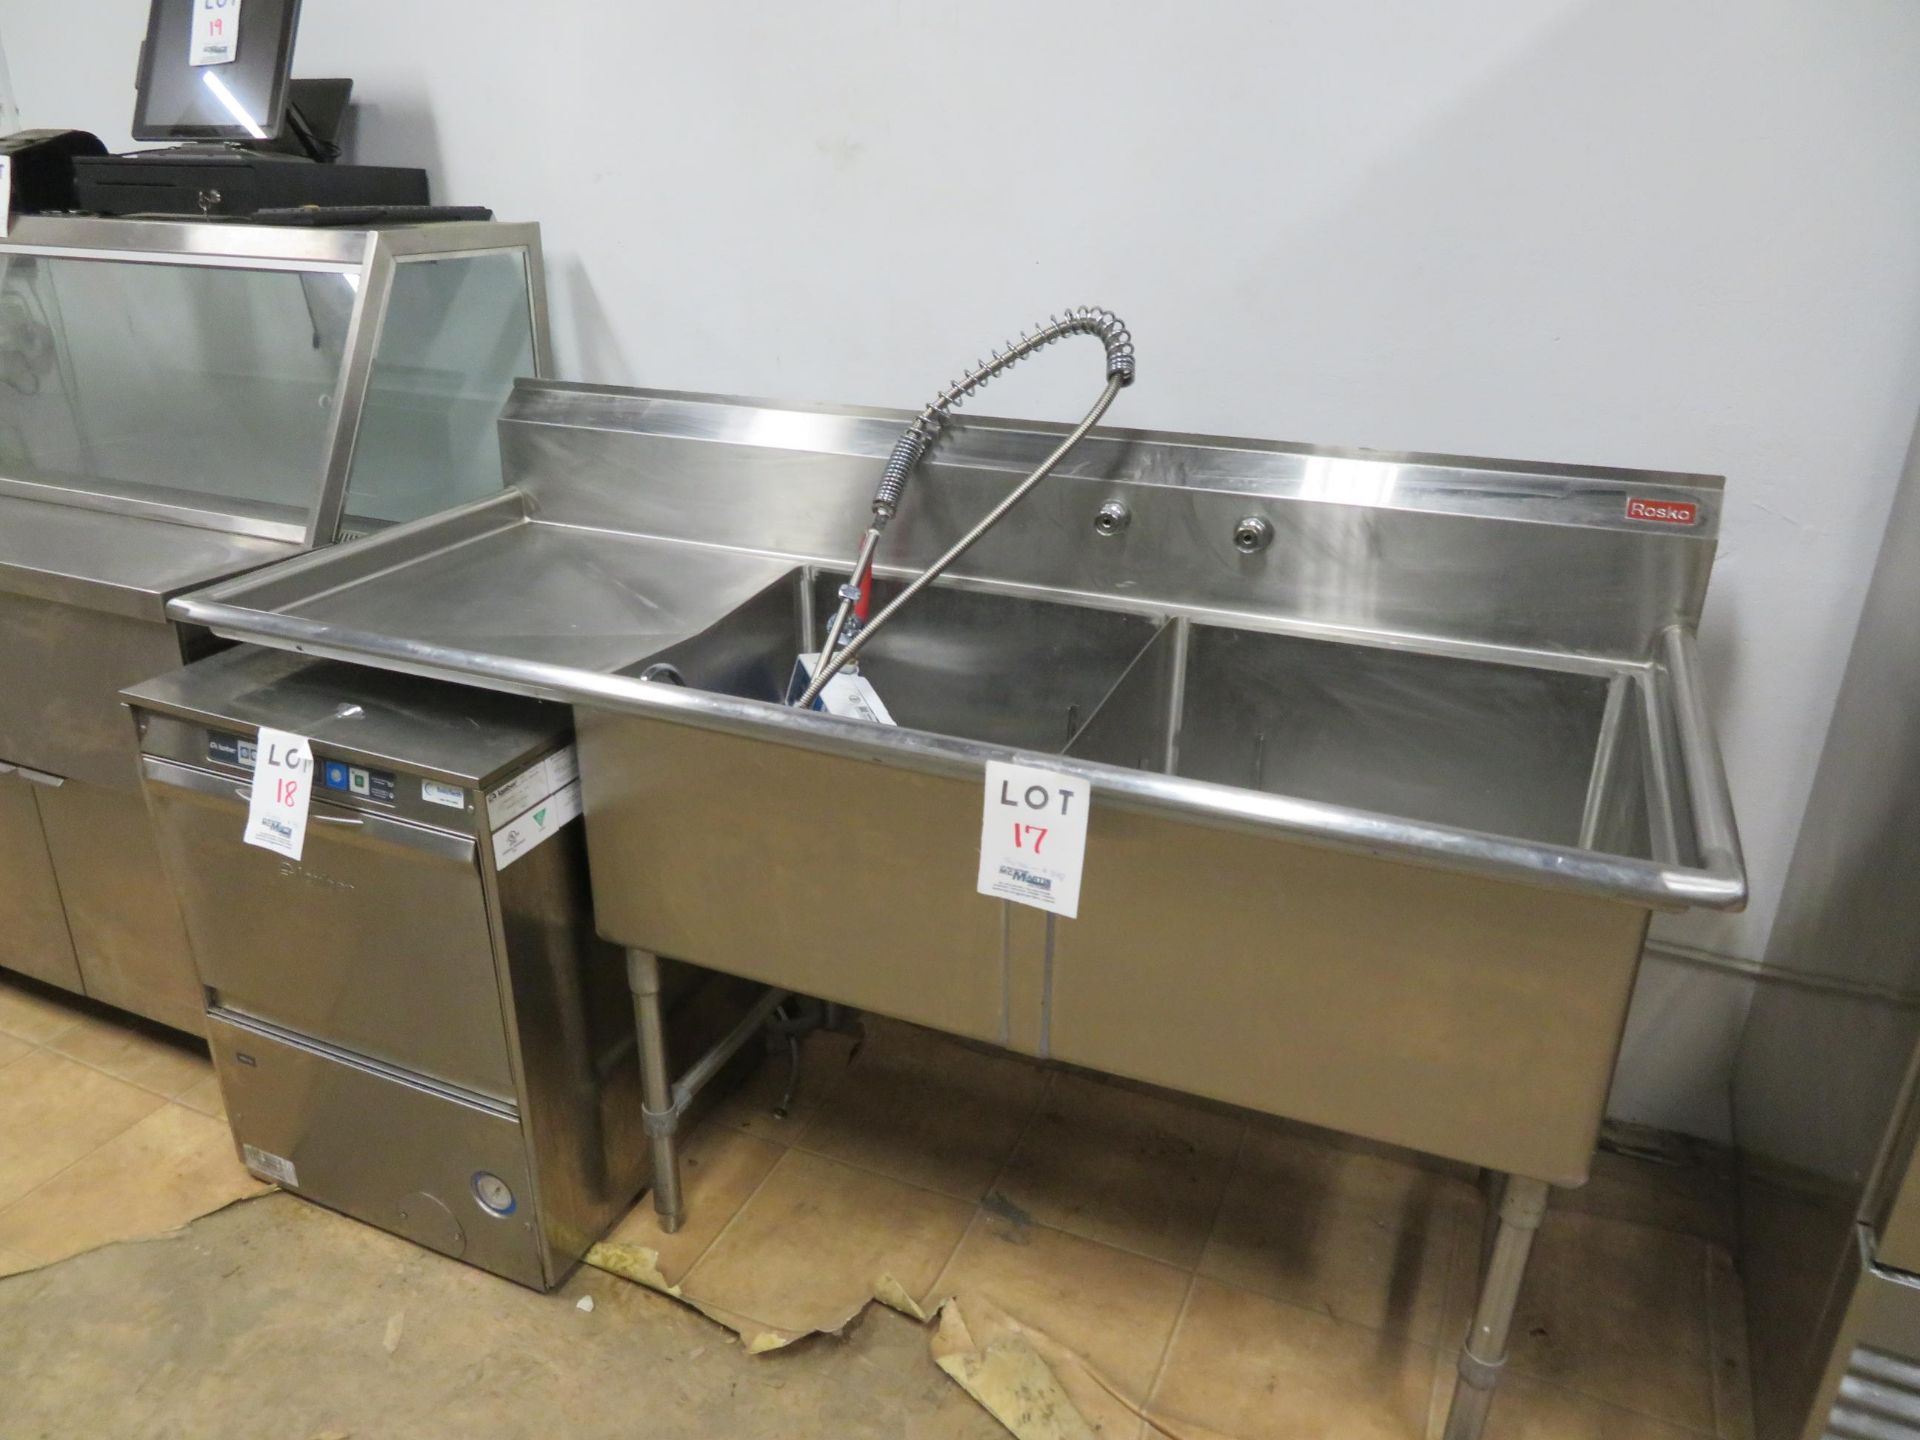 Stainless steel sink with faucet approx. 74"w x 30"d x 36"h